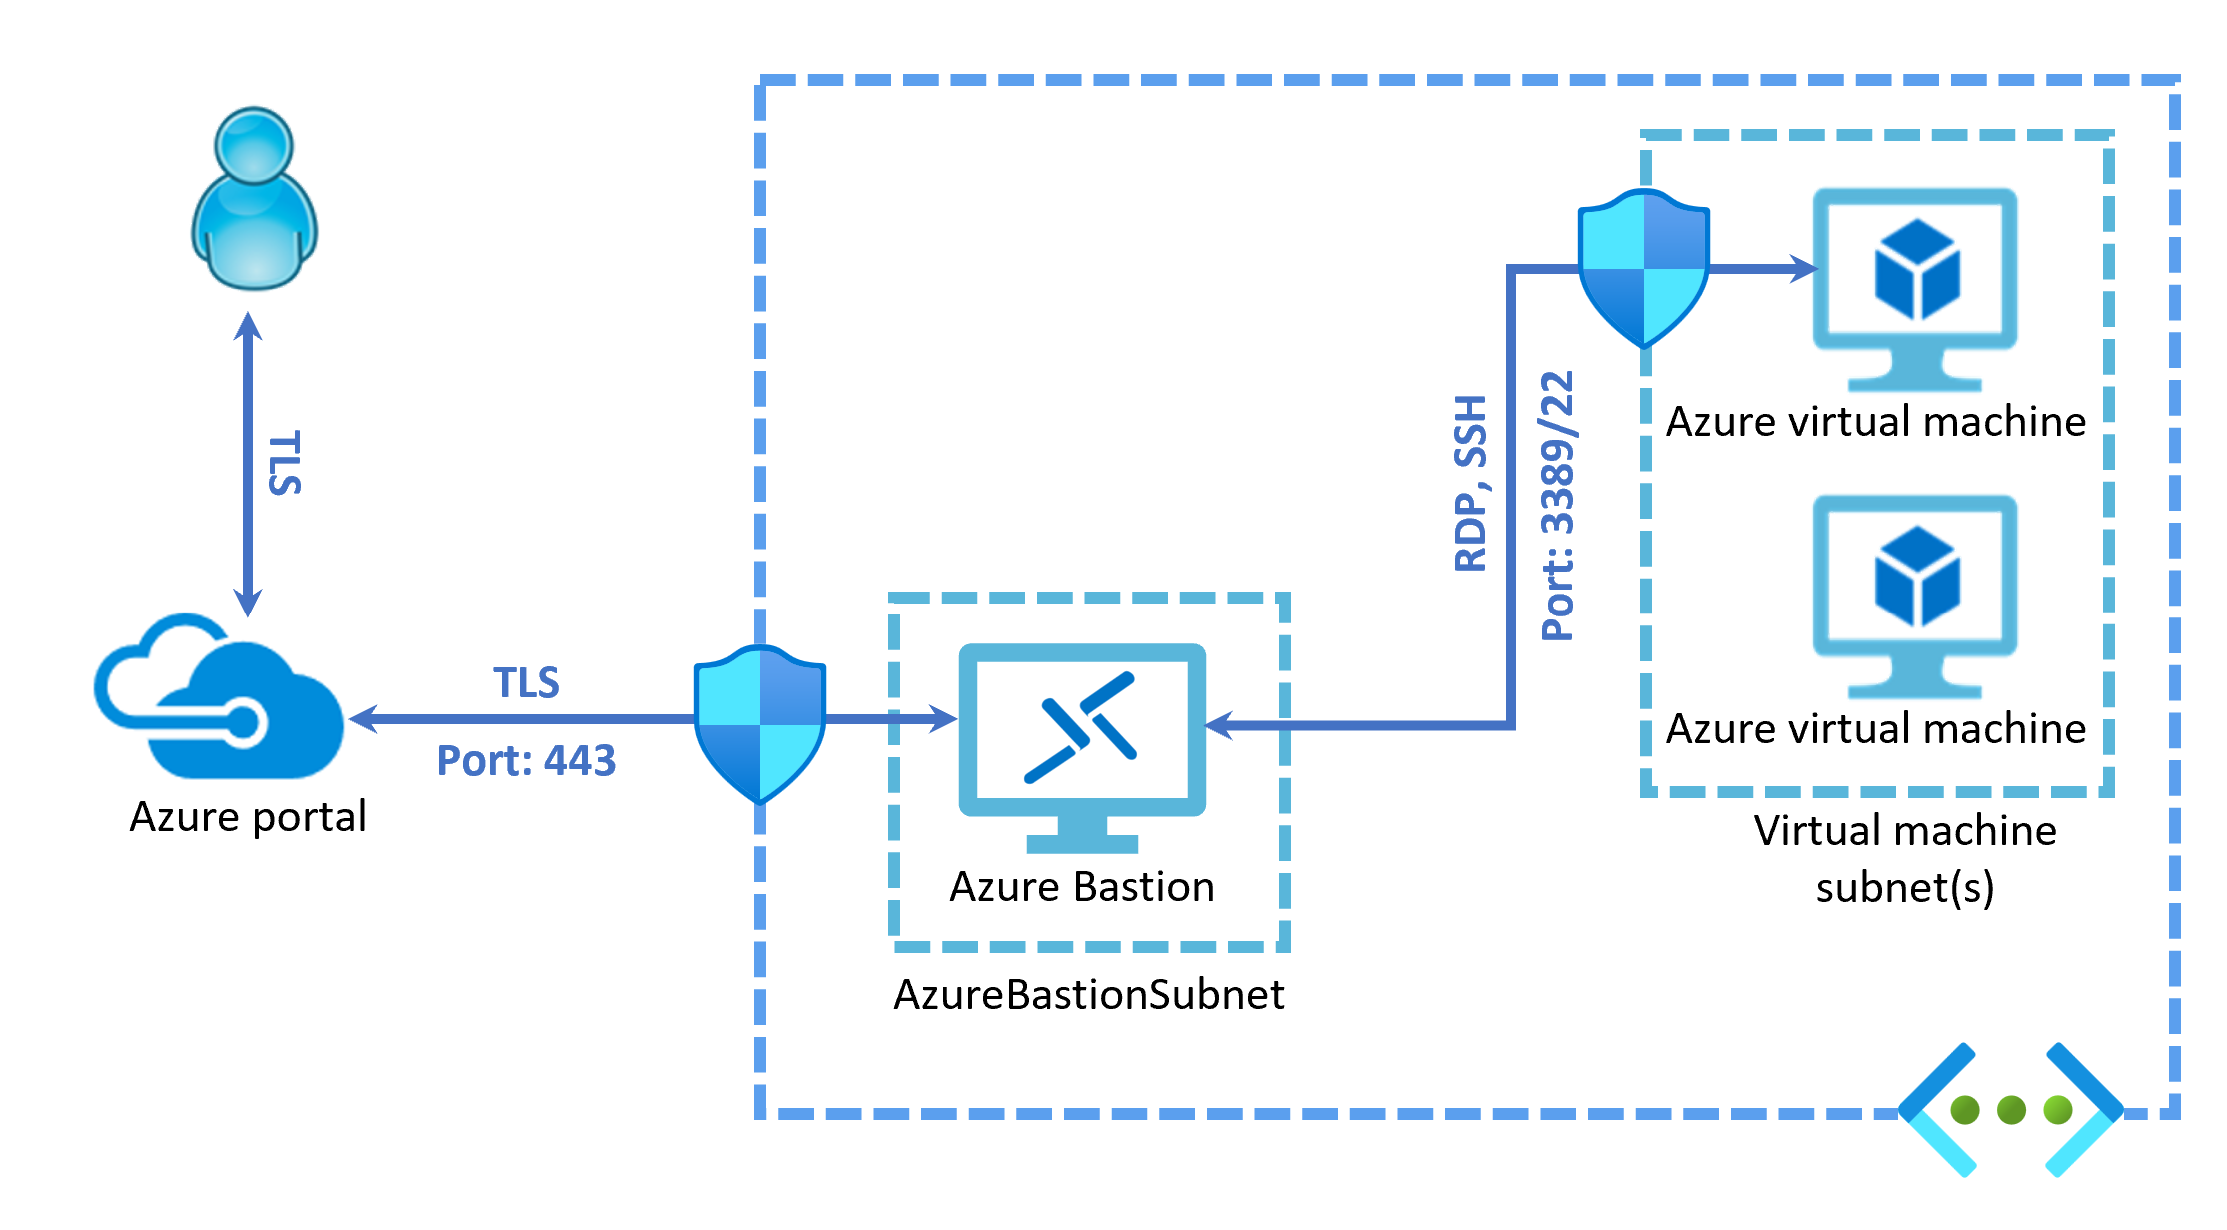 A diagram showing how to connect to a VM through a TLS connection to the Azure portal.